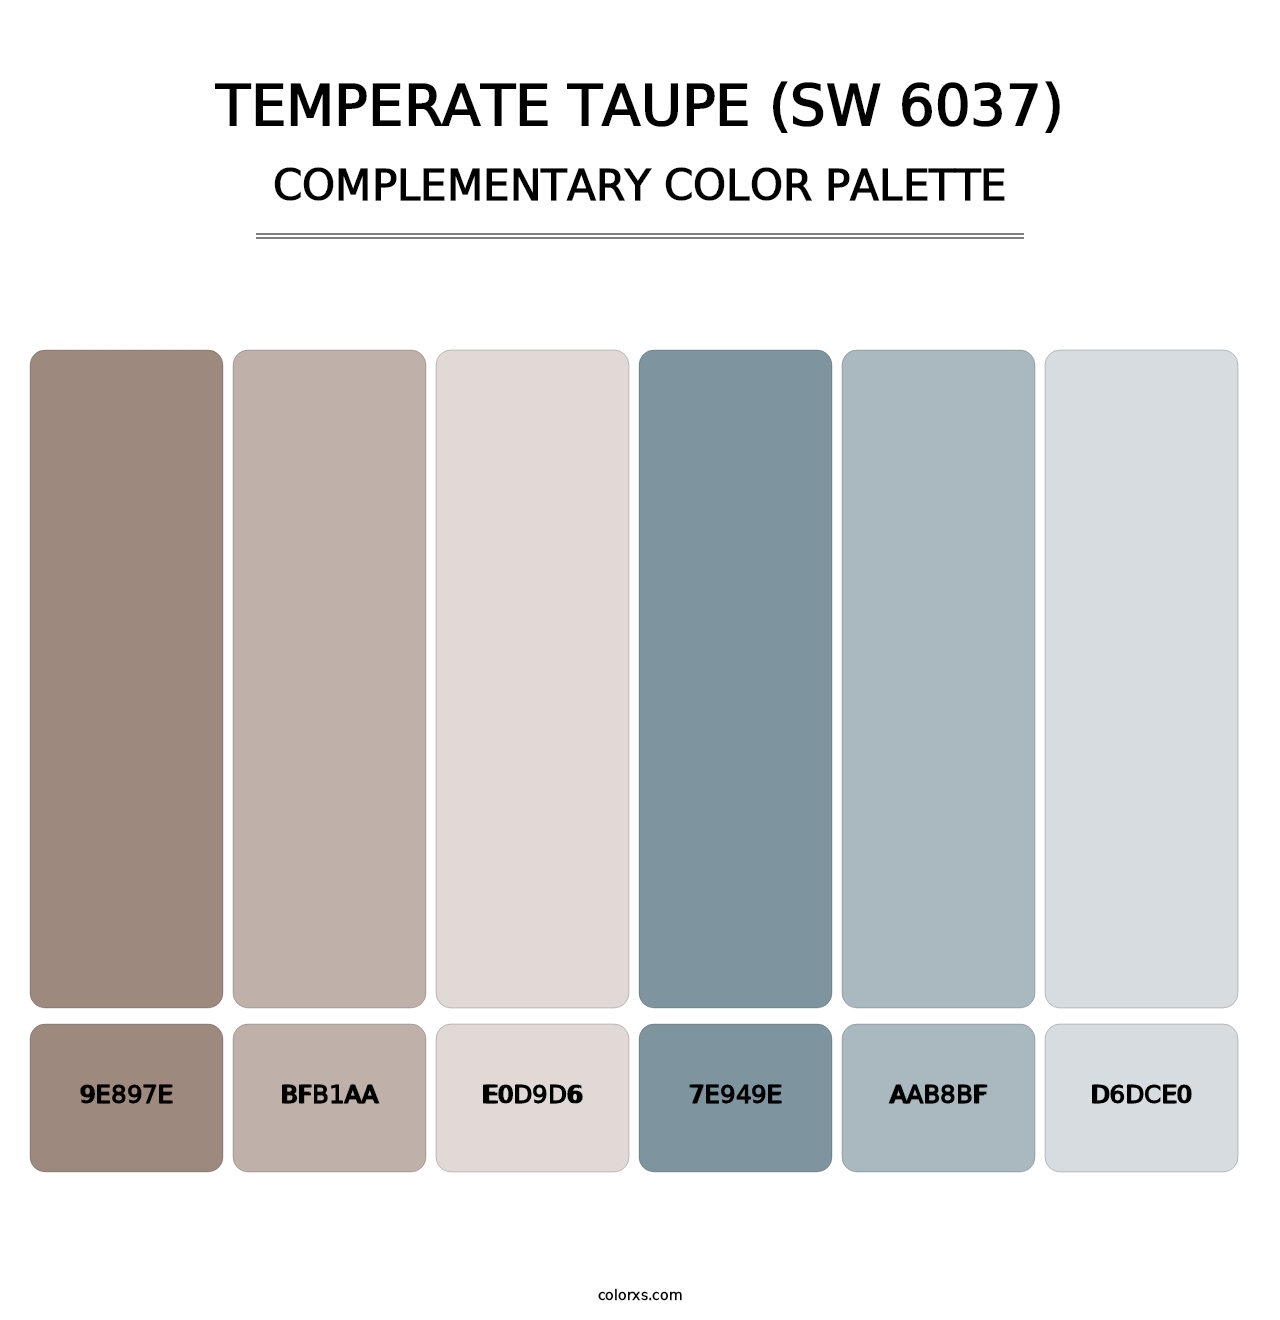 Temperate Taupe (SW 6037) - Complementary Color Palette